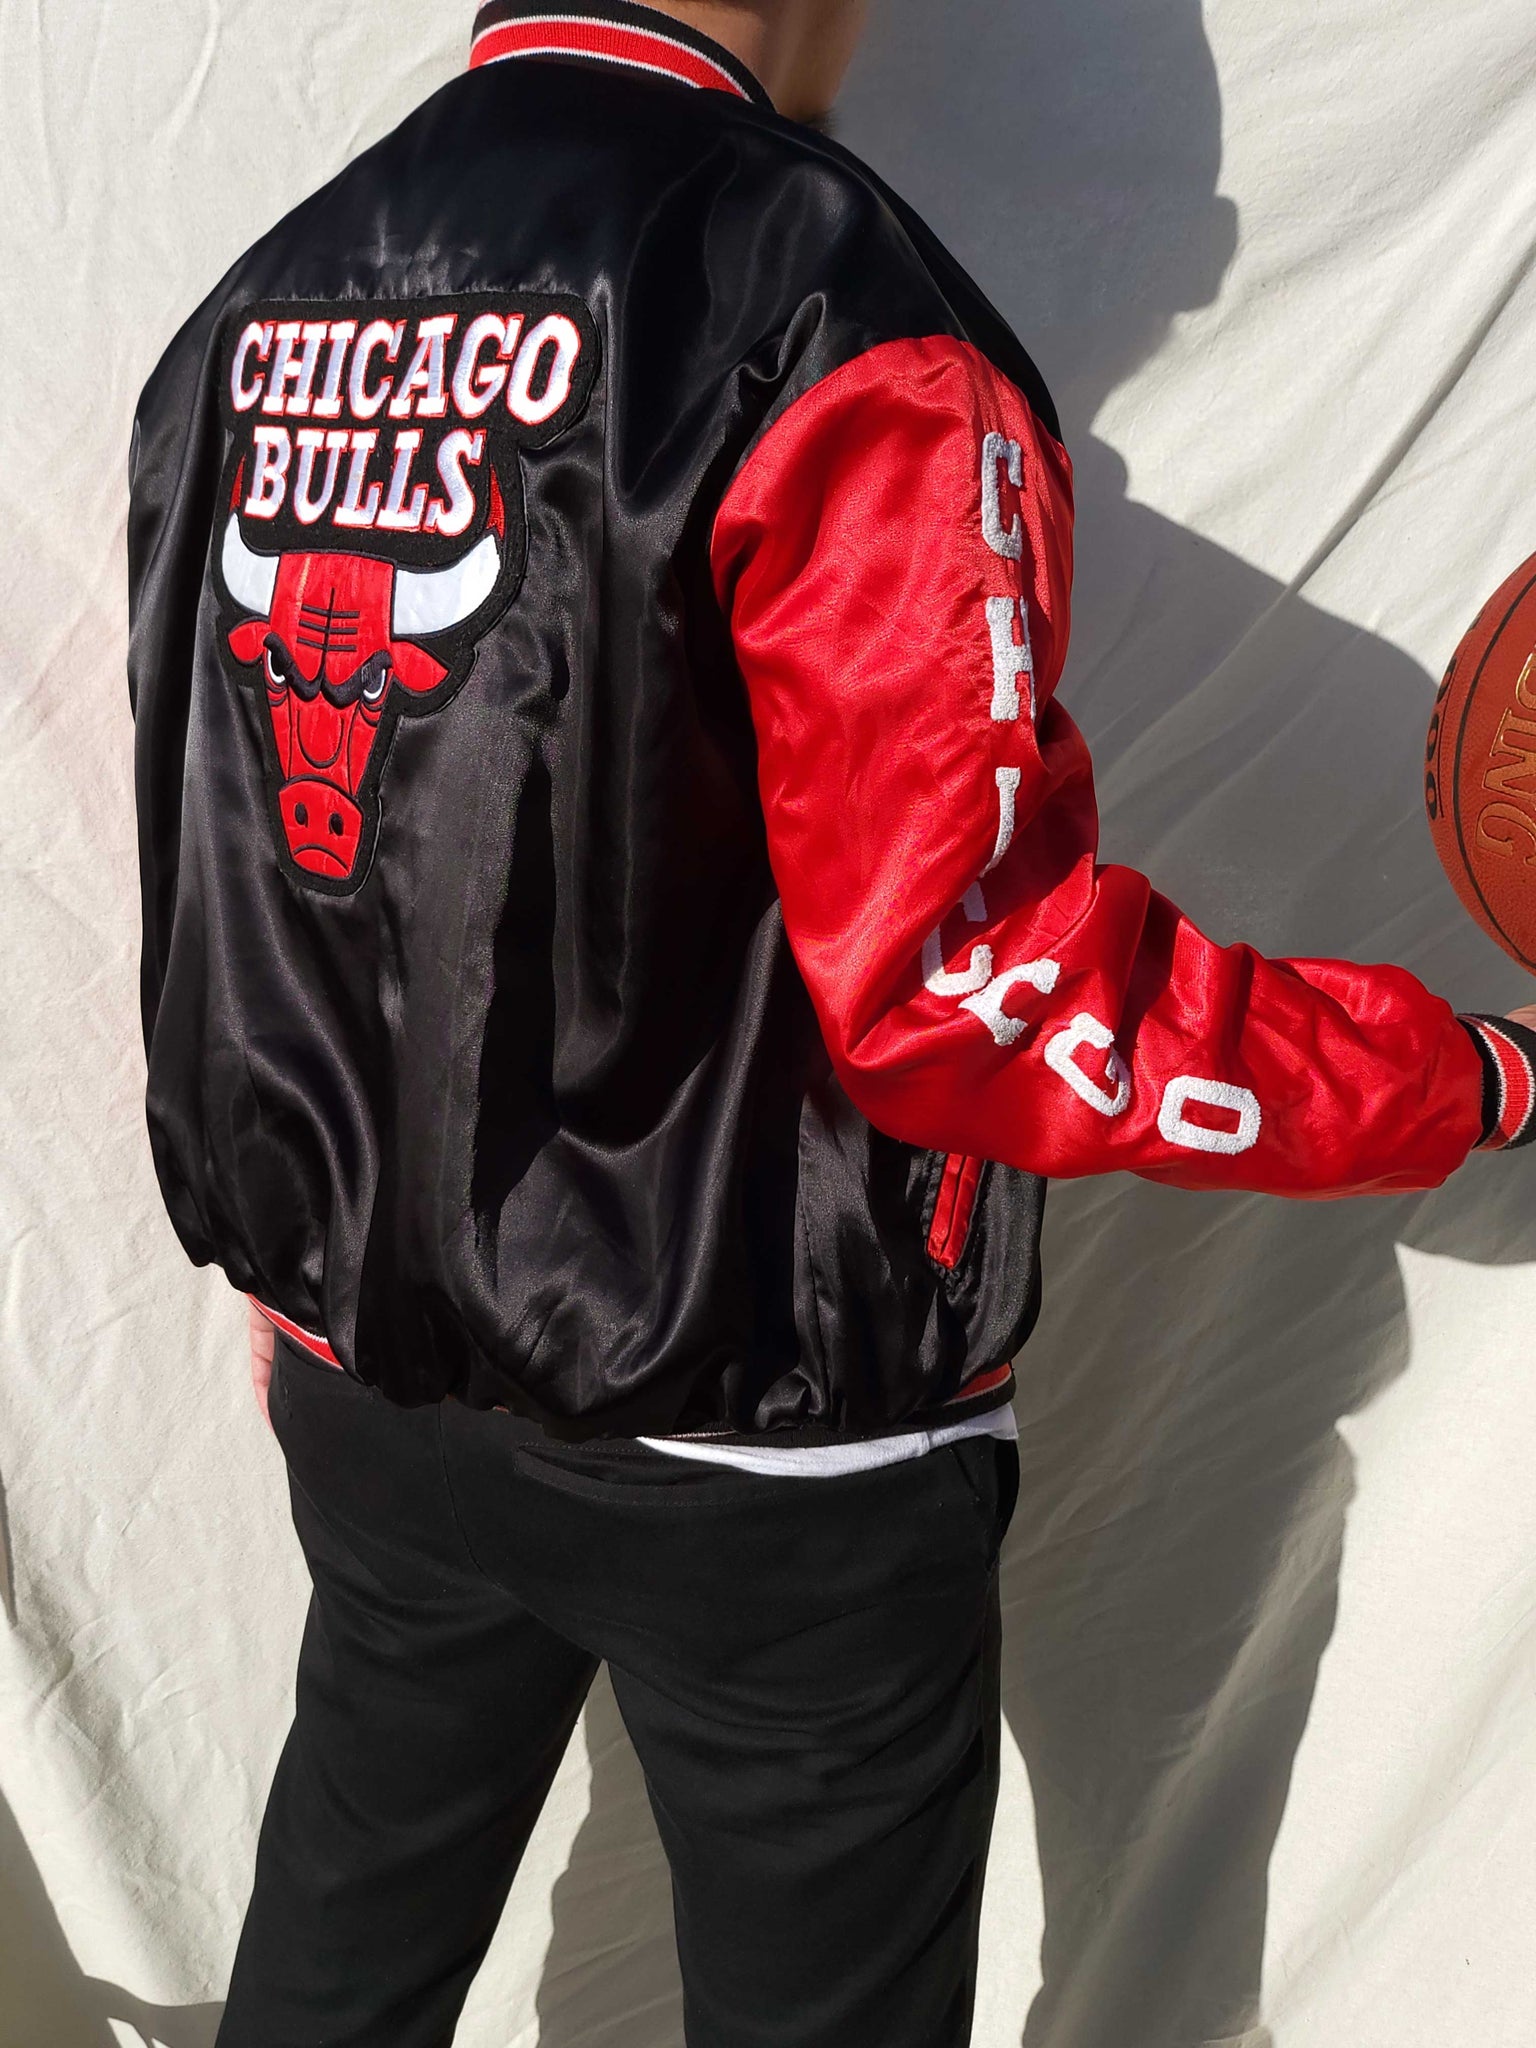 Chicago Bulls Letterman Black and Red Jacket